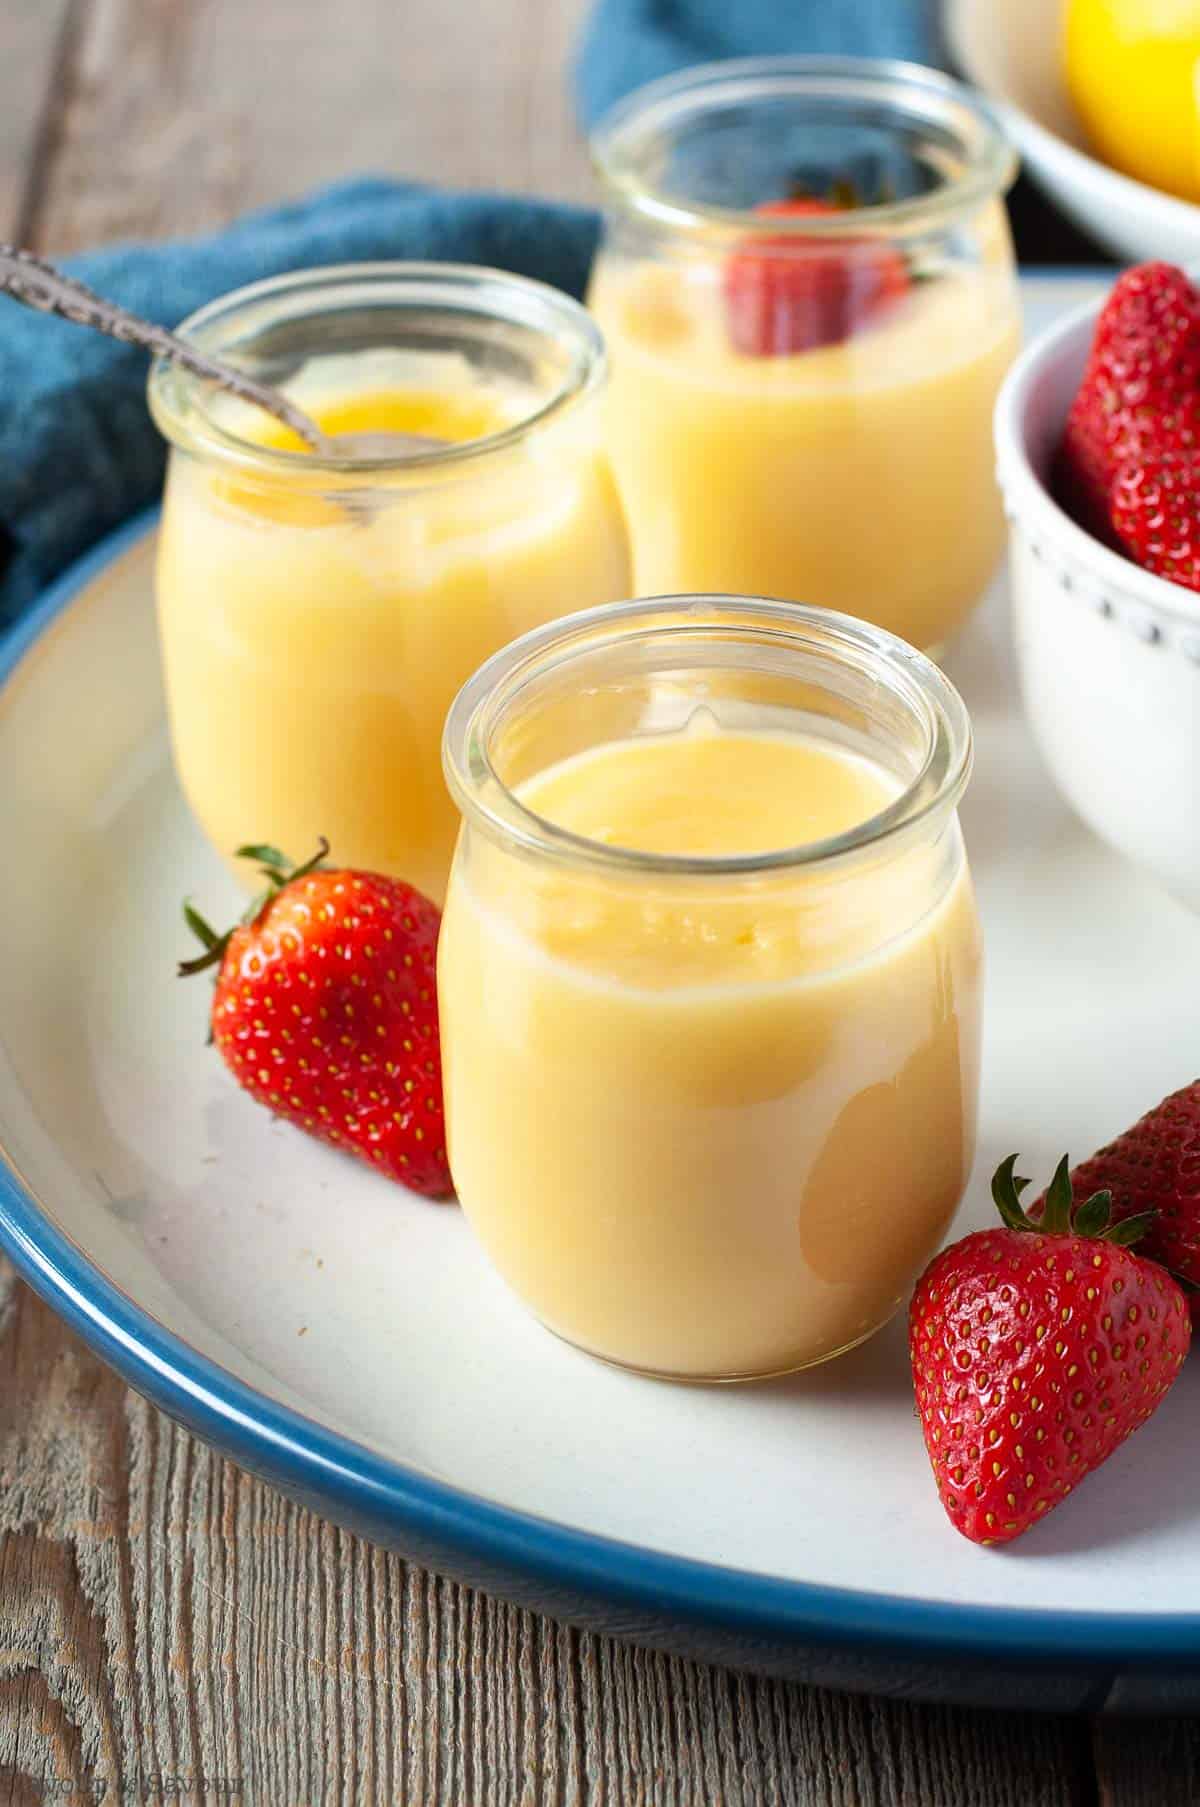 small jars of microwave lemon curd on a plate with fresh strawberries